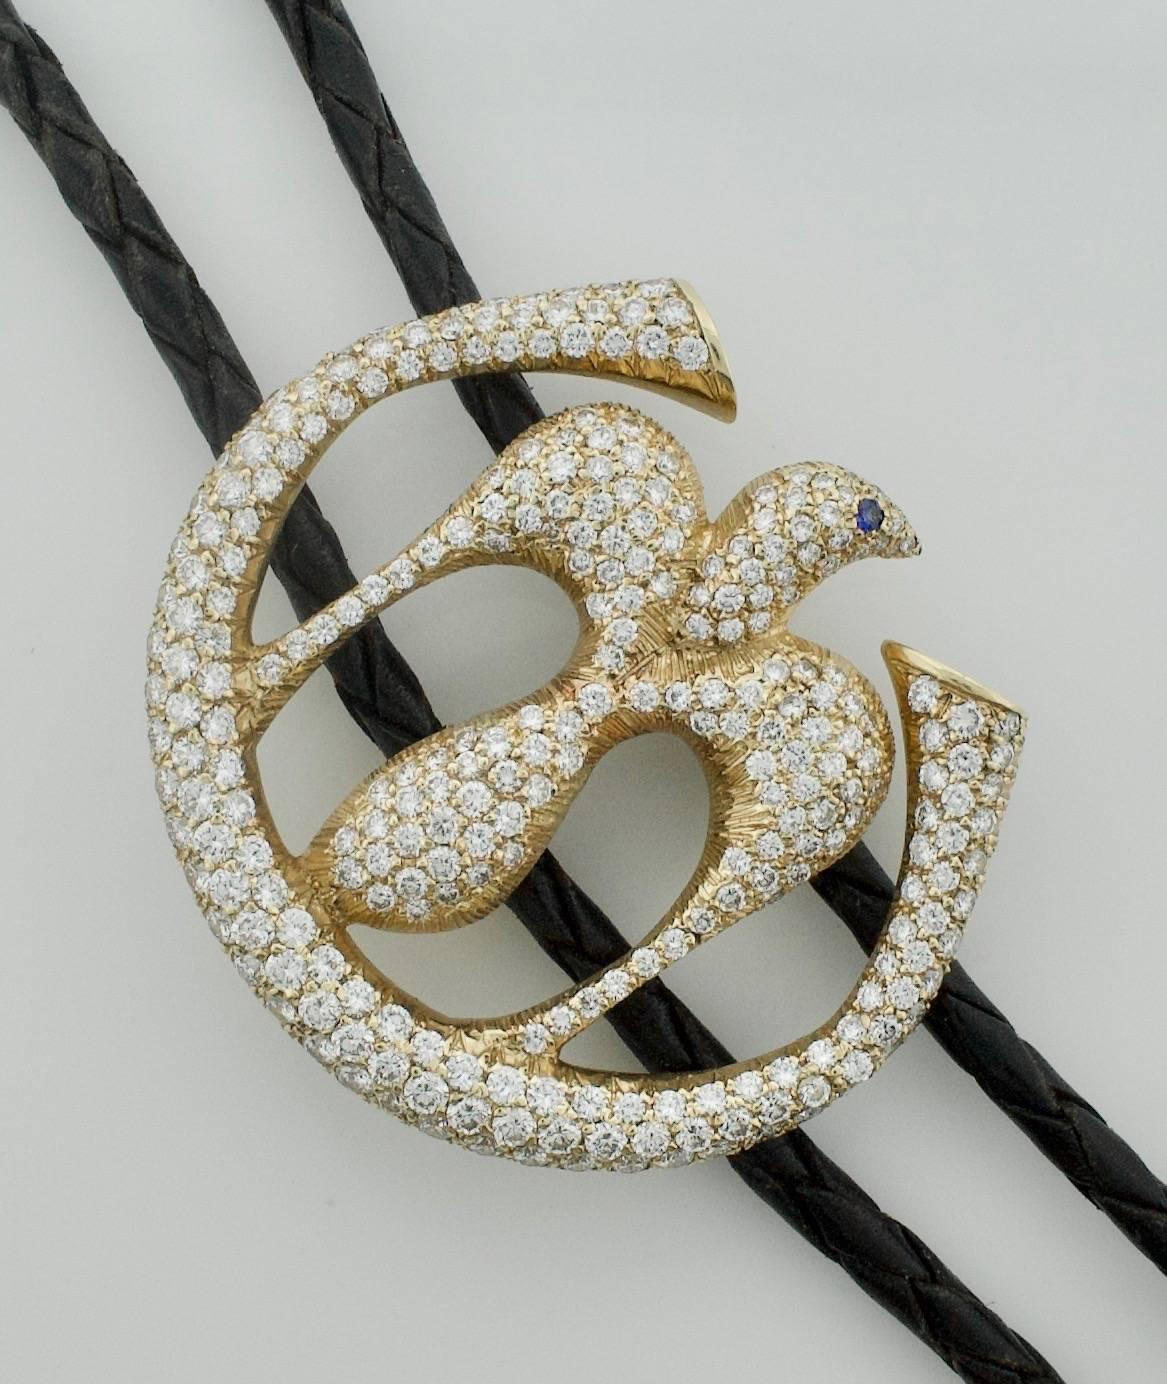 Important Diamond Bolo Tie in 18k Yellow Gold
Two Hundred and Seventy Nine Round Brilliant Cut Diamonds weighing 6.00 carats approximately
Even The Tips are 18k Gold
Depicting a Dove set inside a 